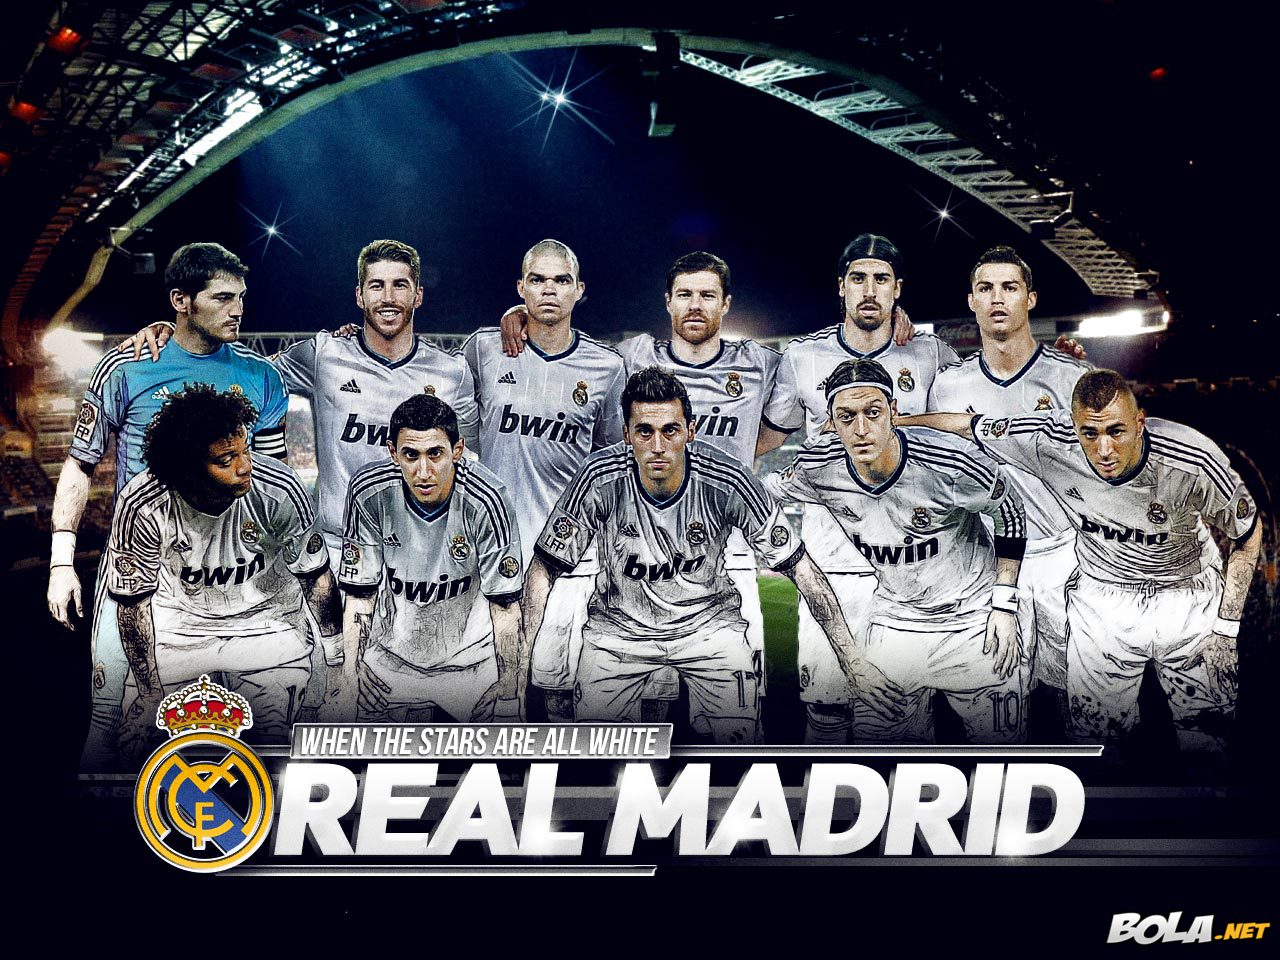 Download Wallpaper Real Madrid Bolanet